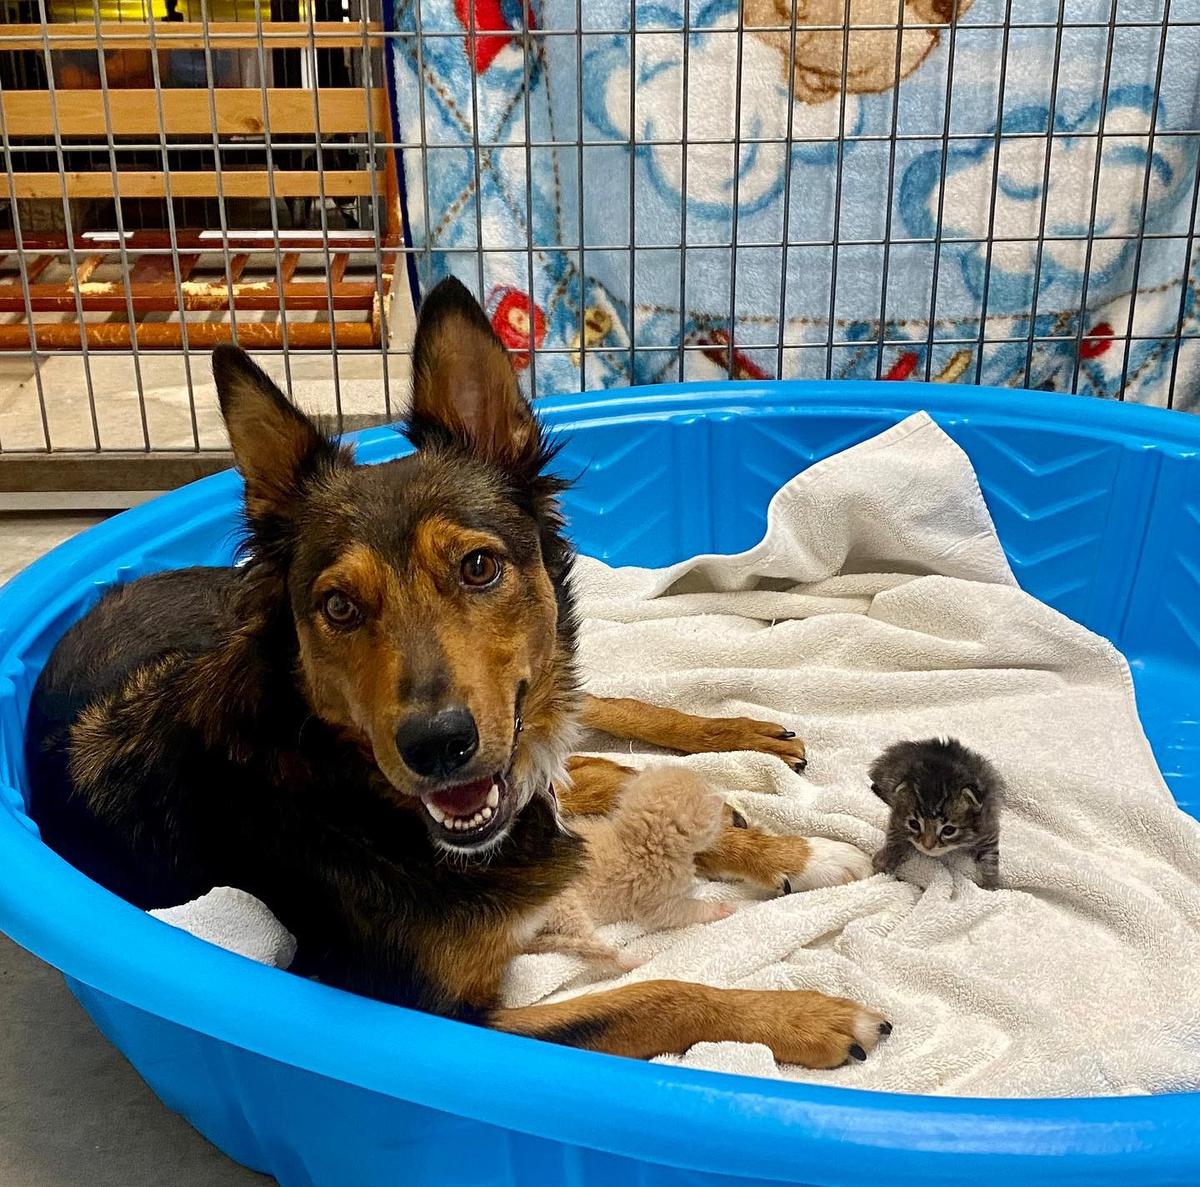 A happy Georgia with her adoptive babies. (Courtesy of <a href="https://www.facebook.com/sunshinedogrescue/">Sunshine Dog Rescue</a>)